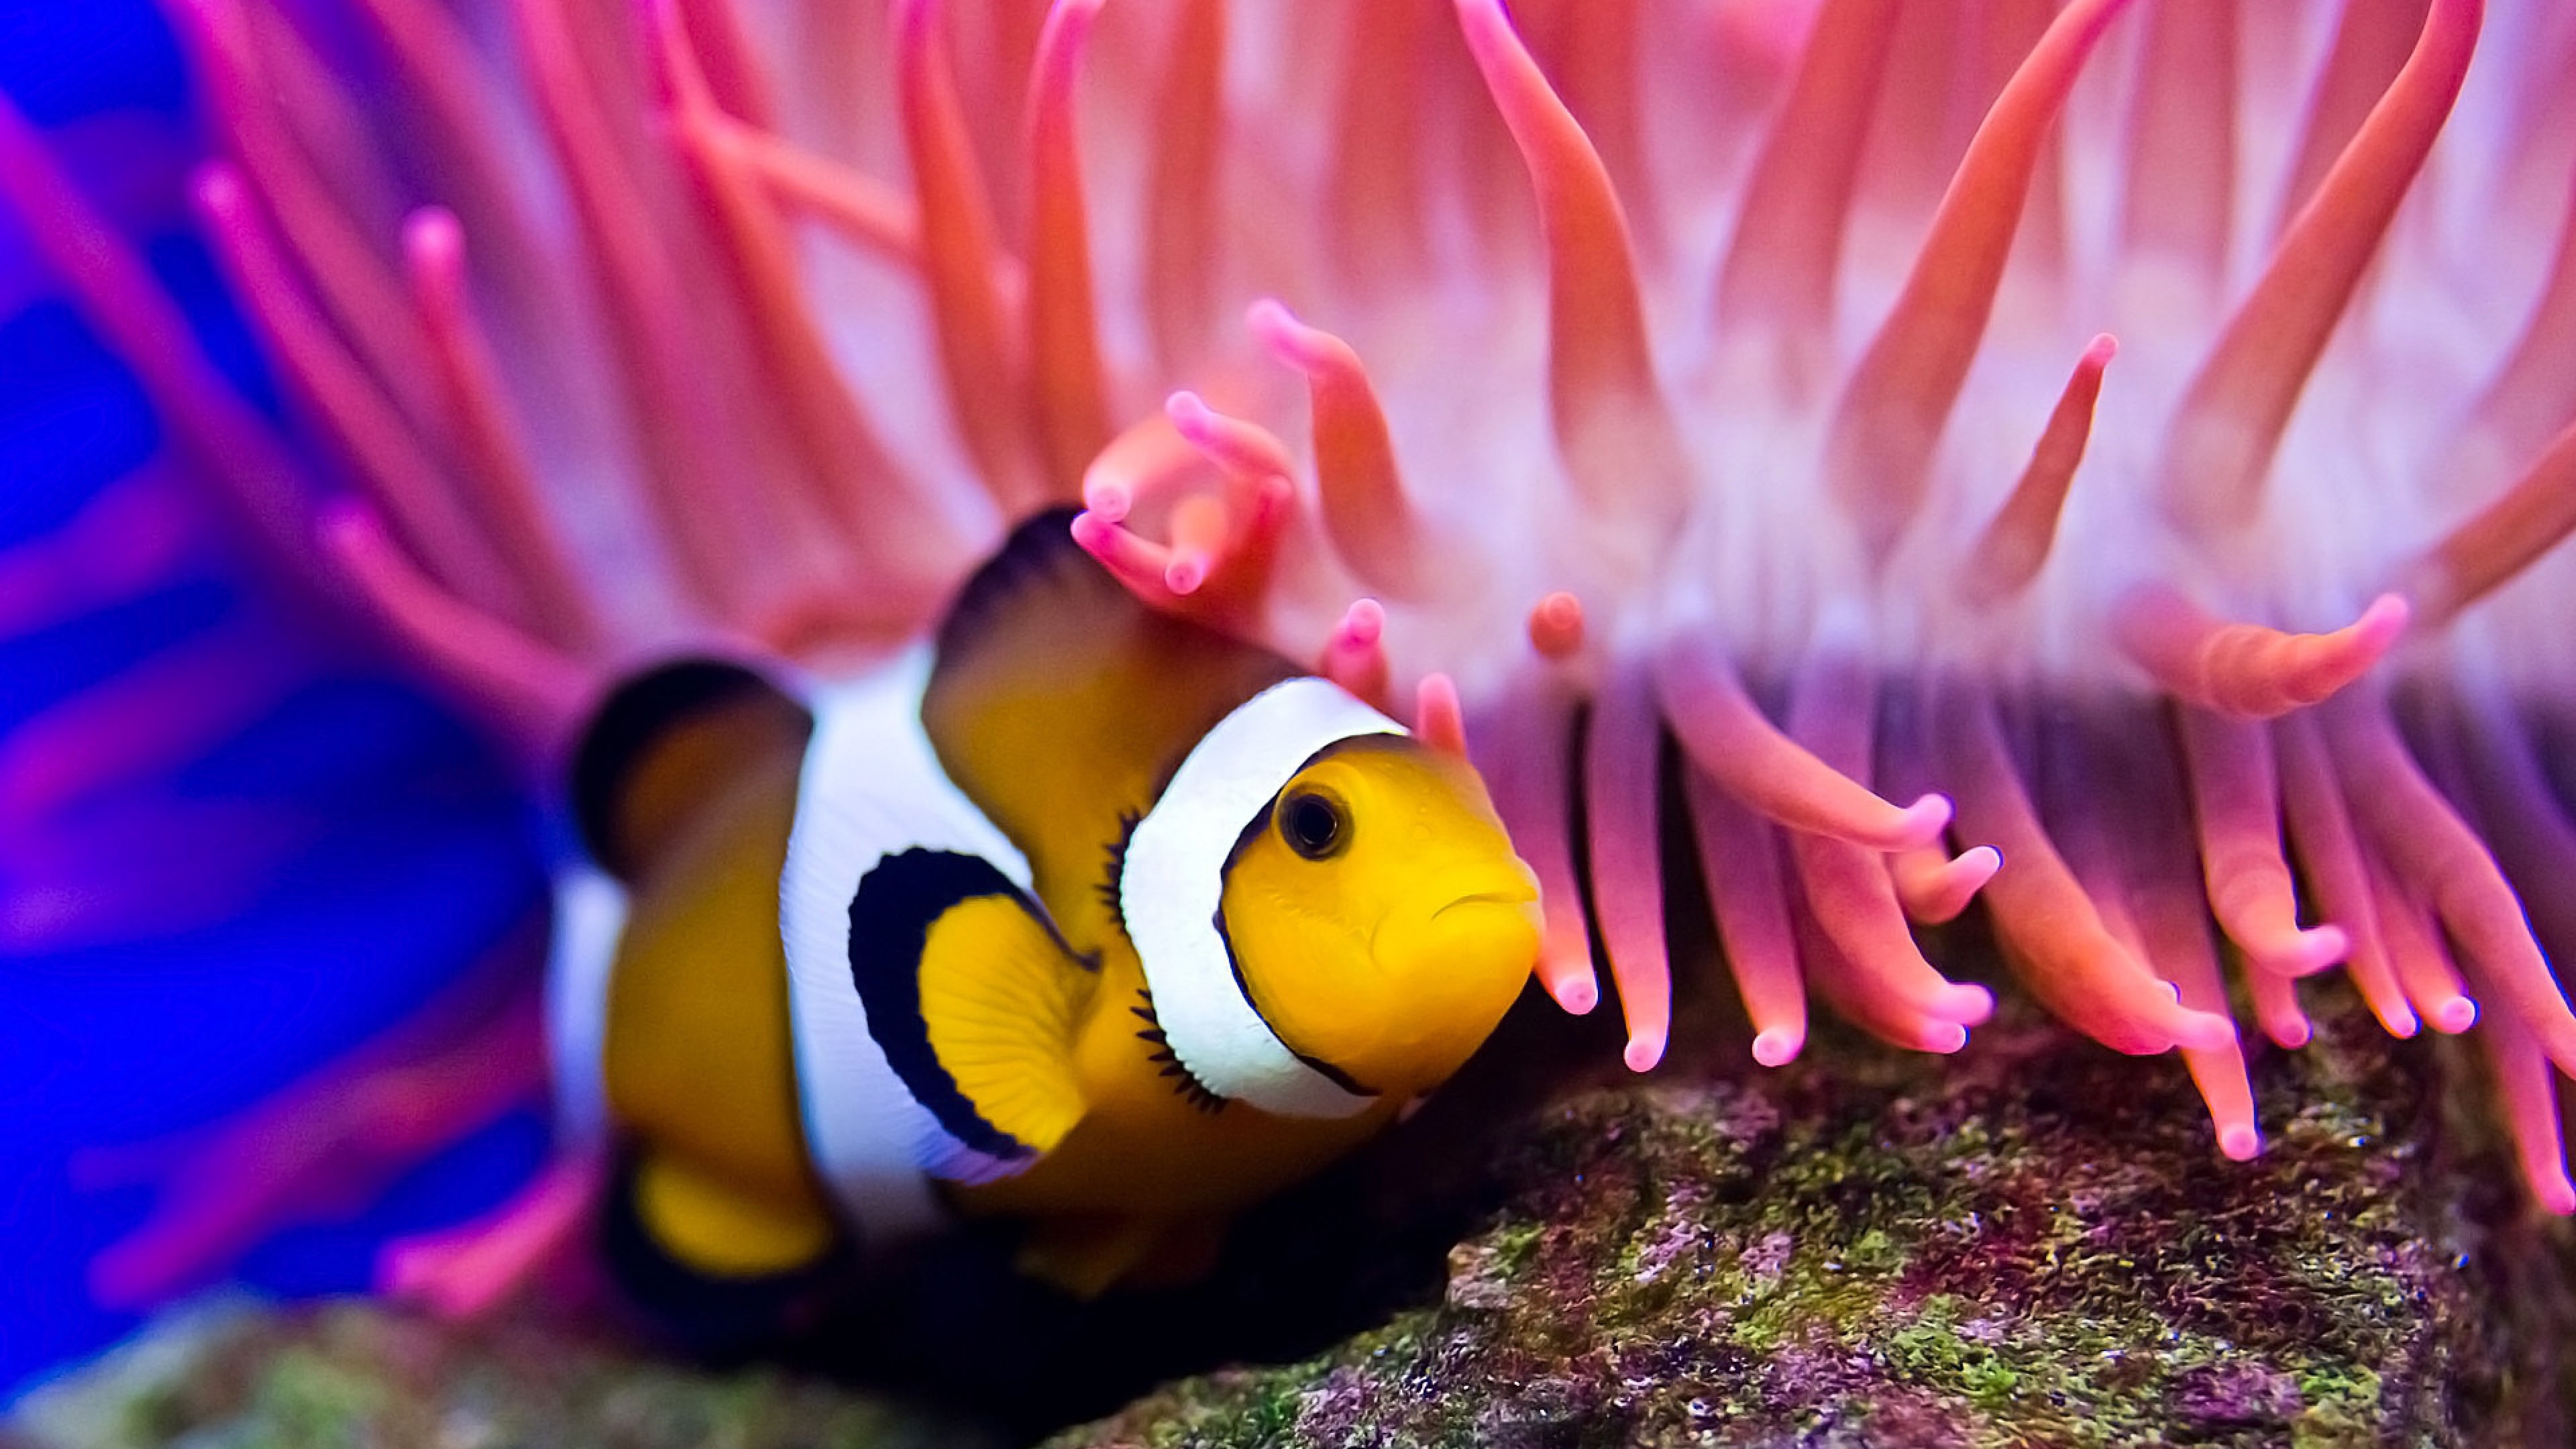 Free download Hd Wallpapers Clown Fish 1920 X 1200 1238 Kb Jpeg HD  Wallpapers 640x960 for your Desktop Mobile  Tablet  Explore 44 Clown  Fish Wallpaper HD  Creepy Clown Wallpaper Scary Clown Wallpapers Clown  Wallpaper